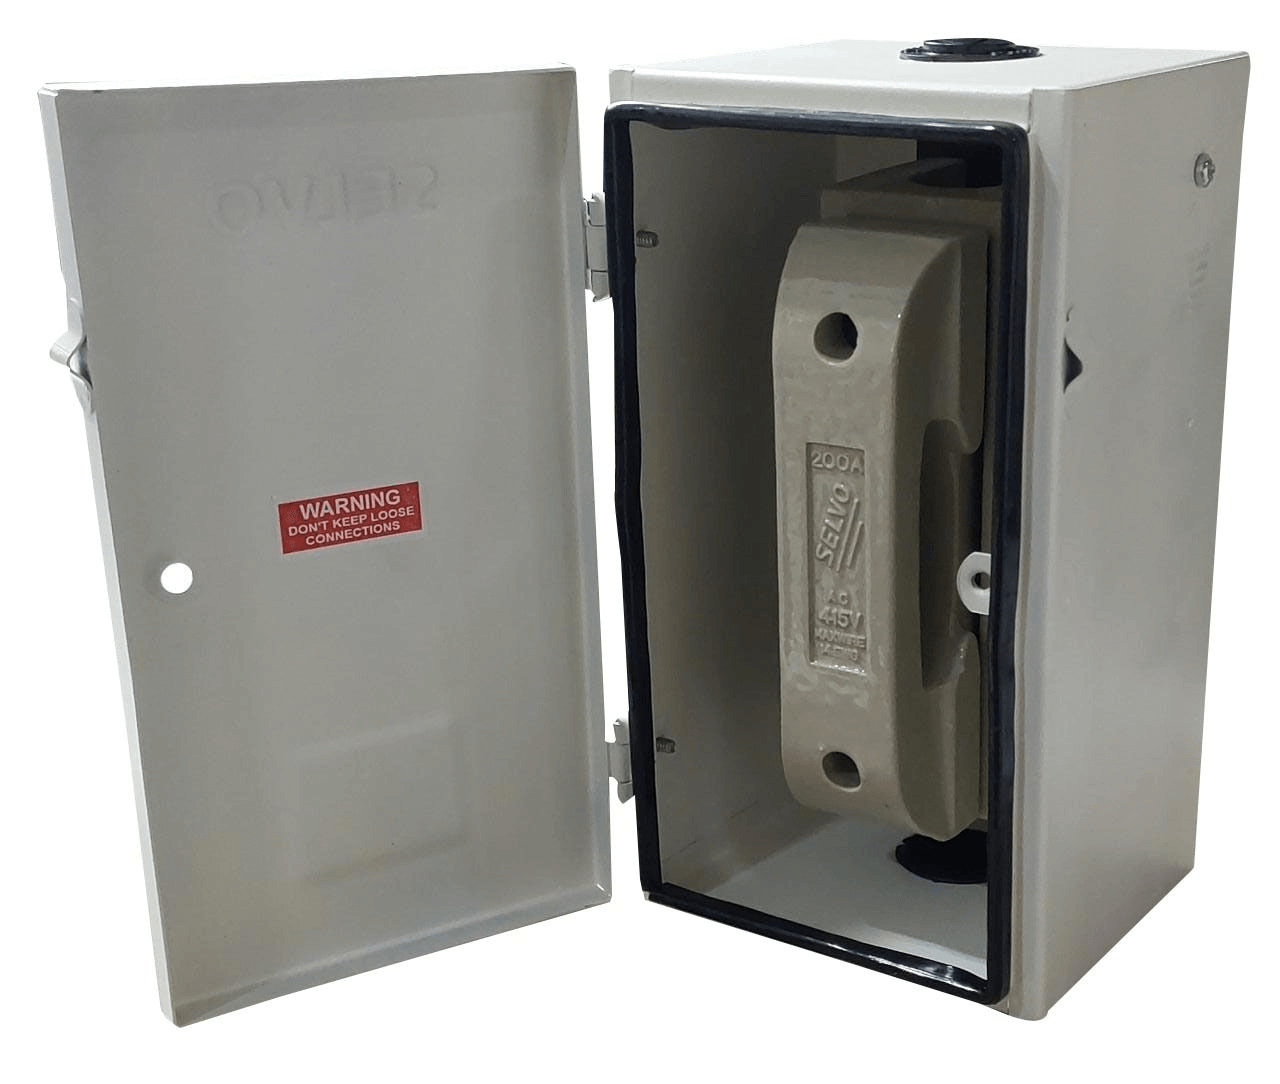 selvo-200a-sheet-metal-enclosure-with-kitkat-fuse-sel032